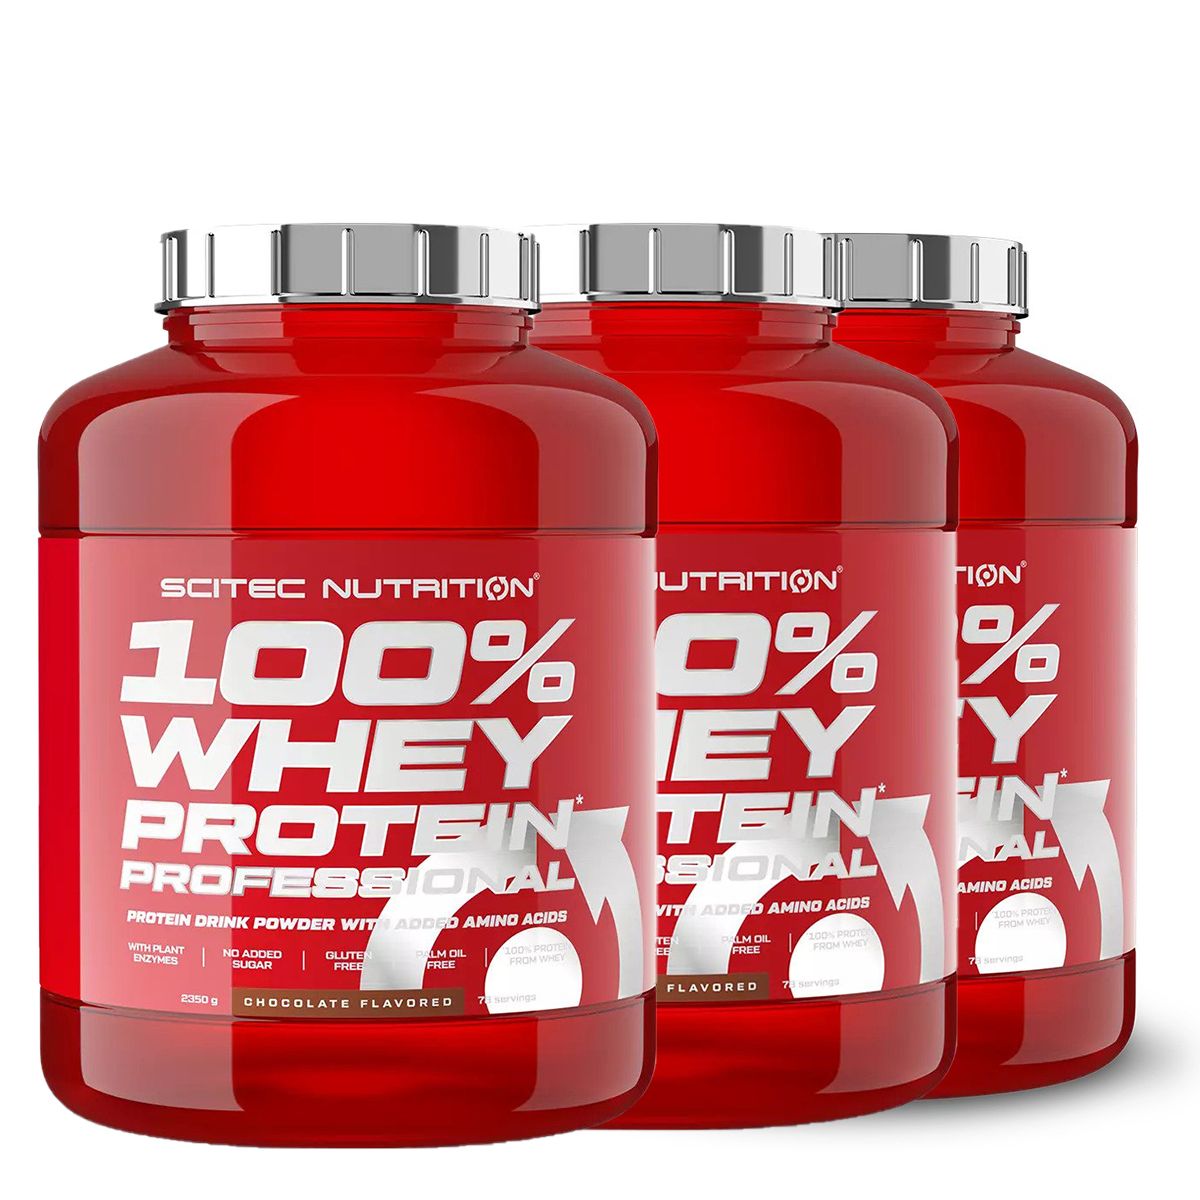 SCITEC NUTRITION - 100% WHEY PROTEIN PROFESSIONAL PROTEIN DRINK - 3 x 2350 G